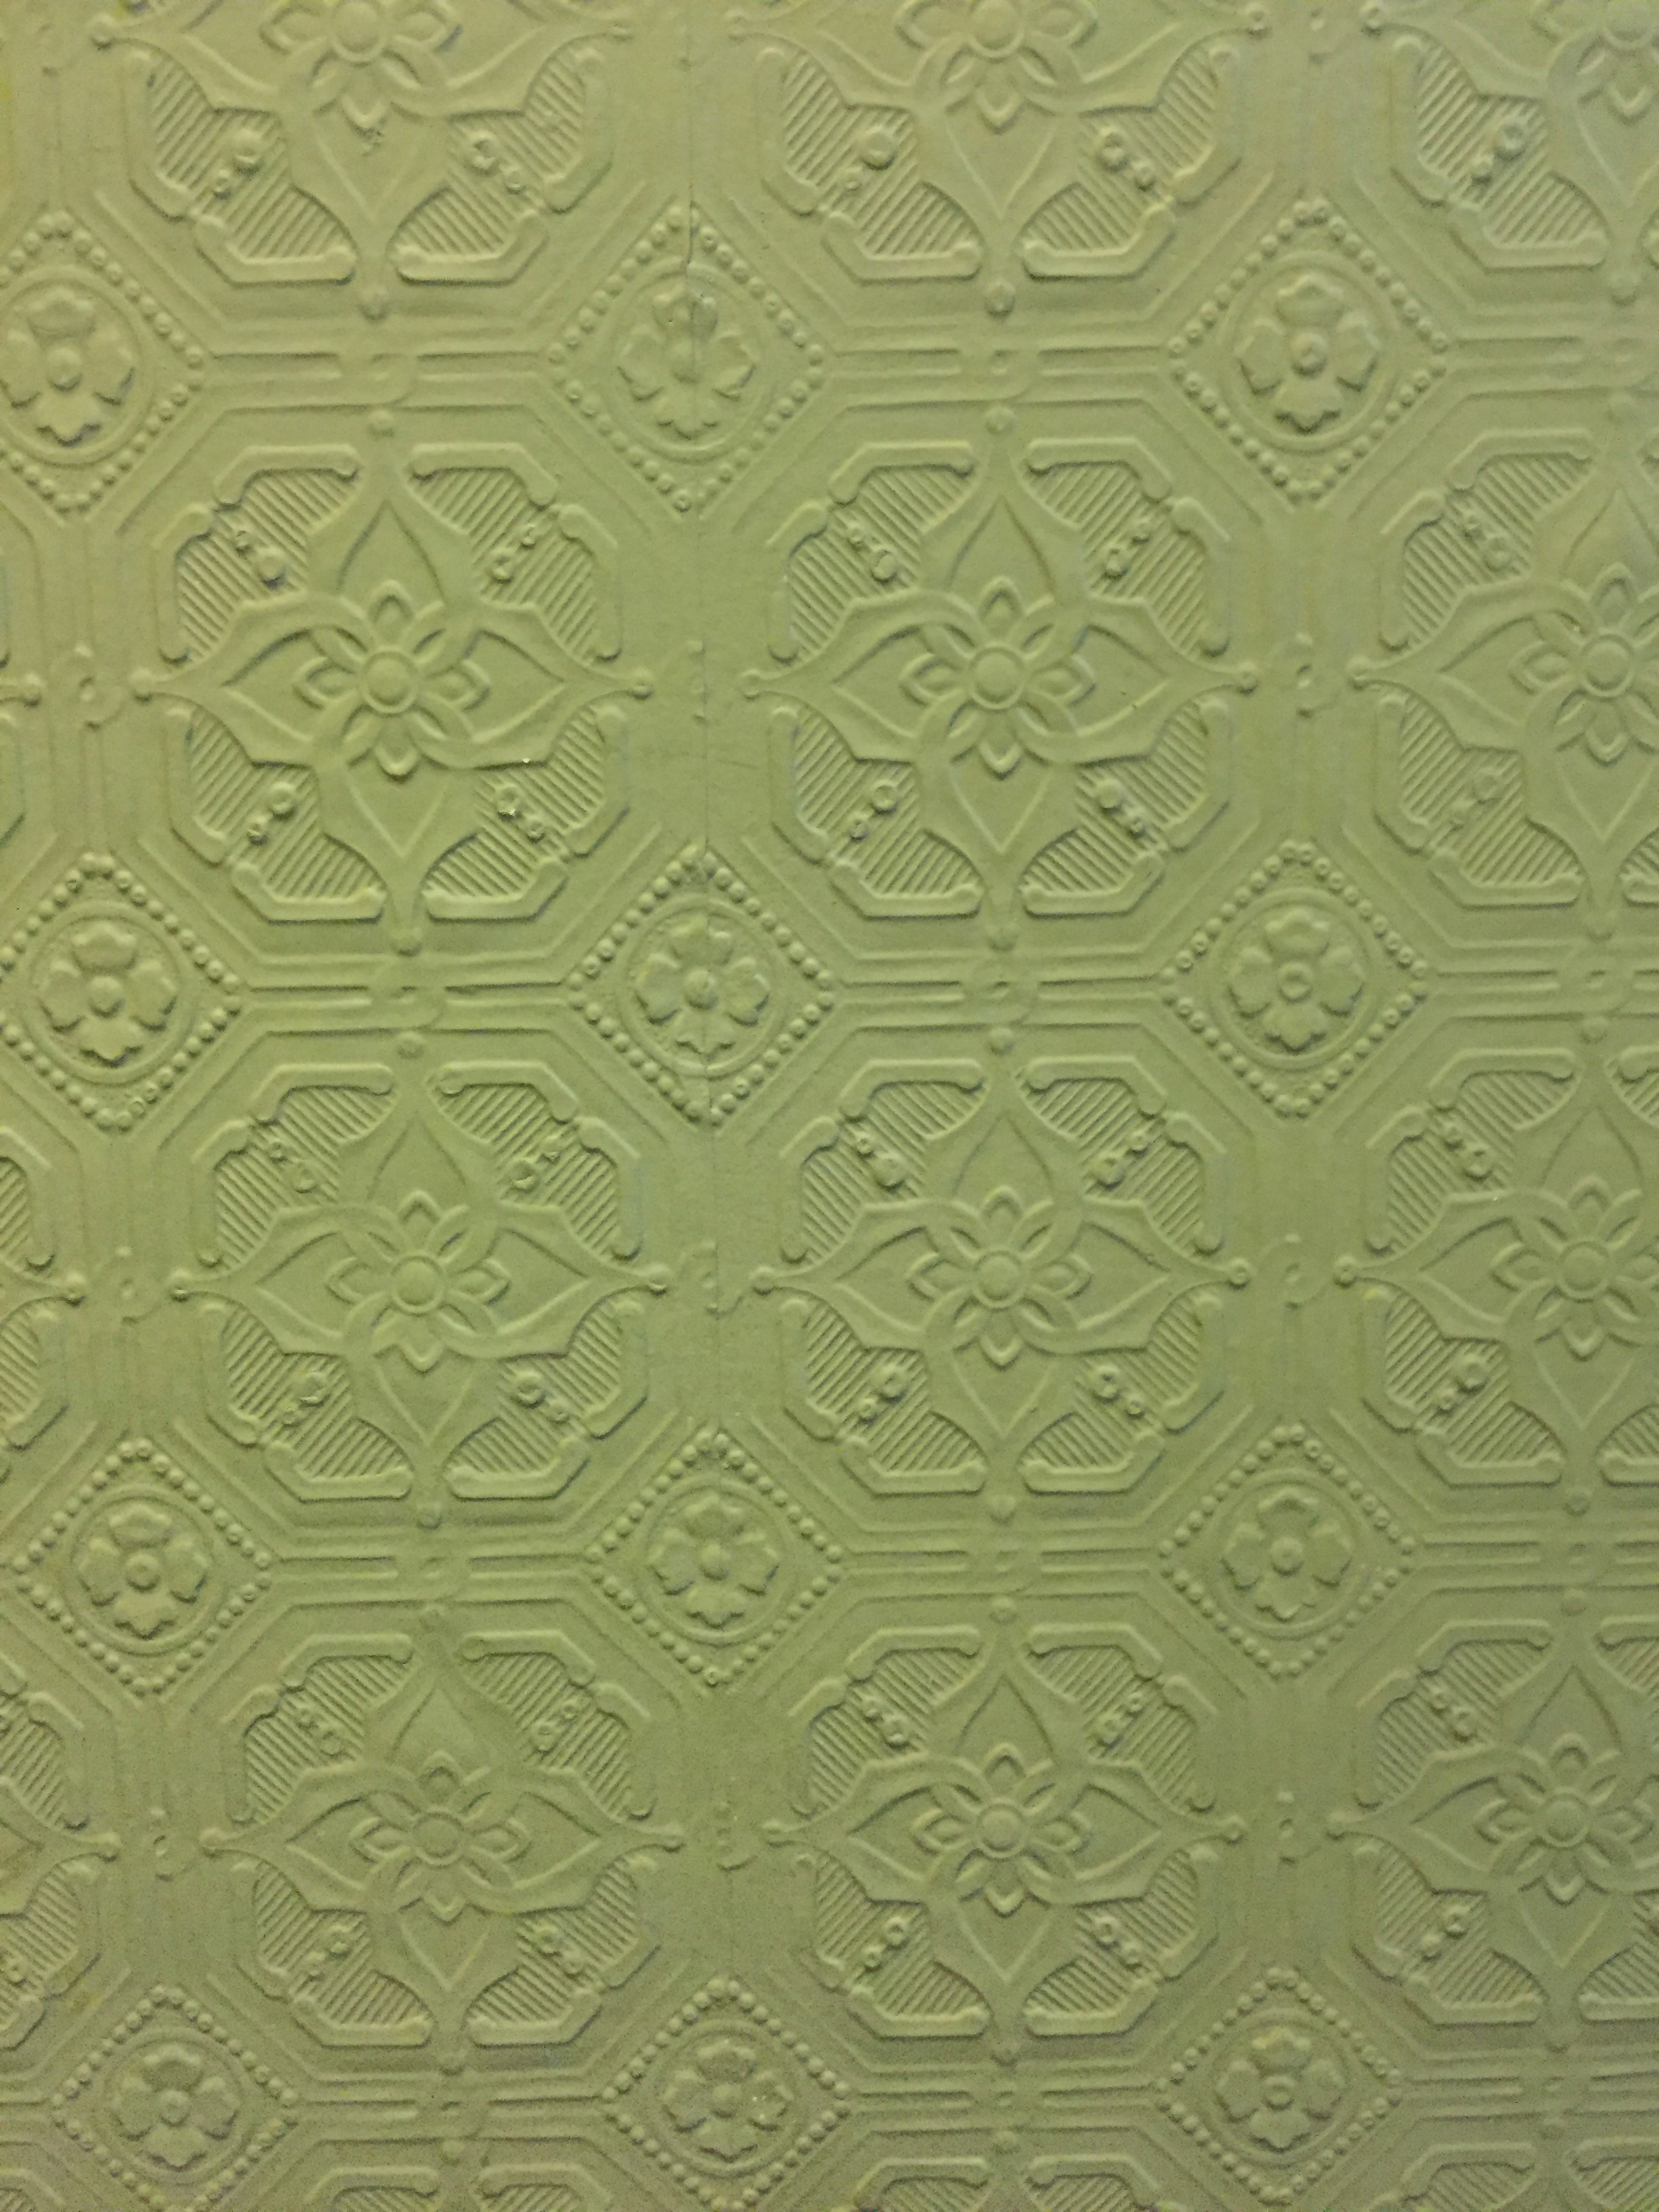 Green Wall Paper With Ornate Patterns Free Textures